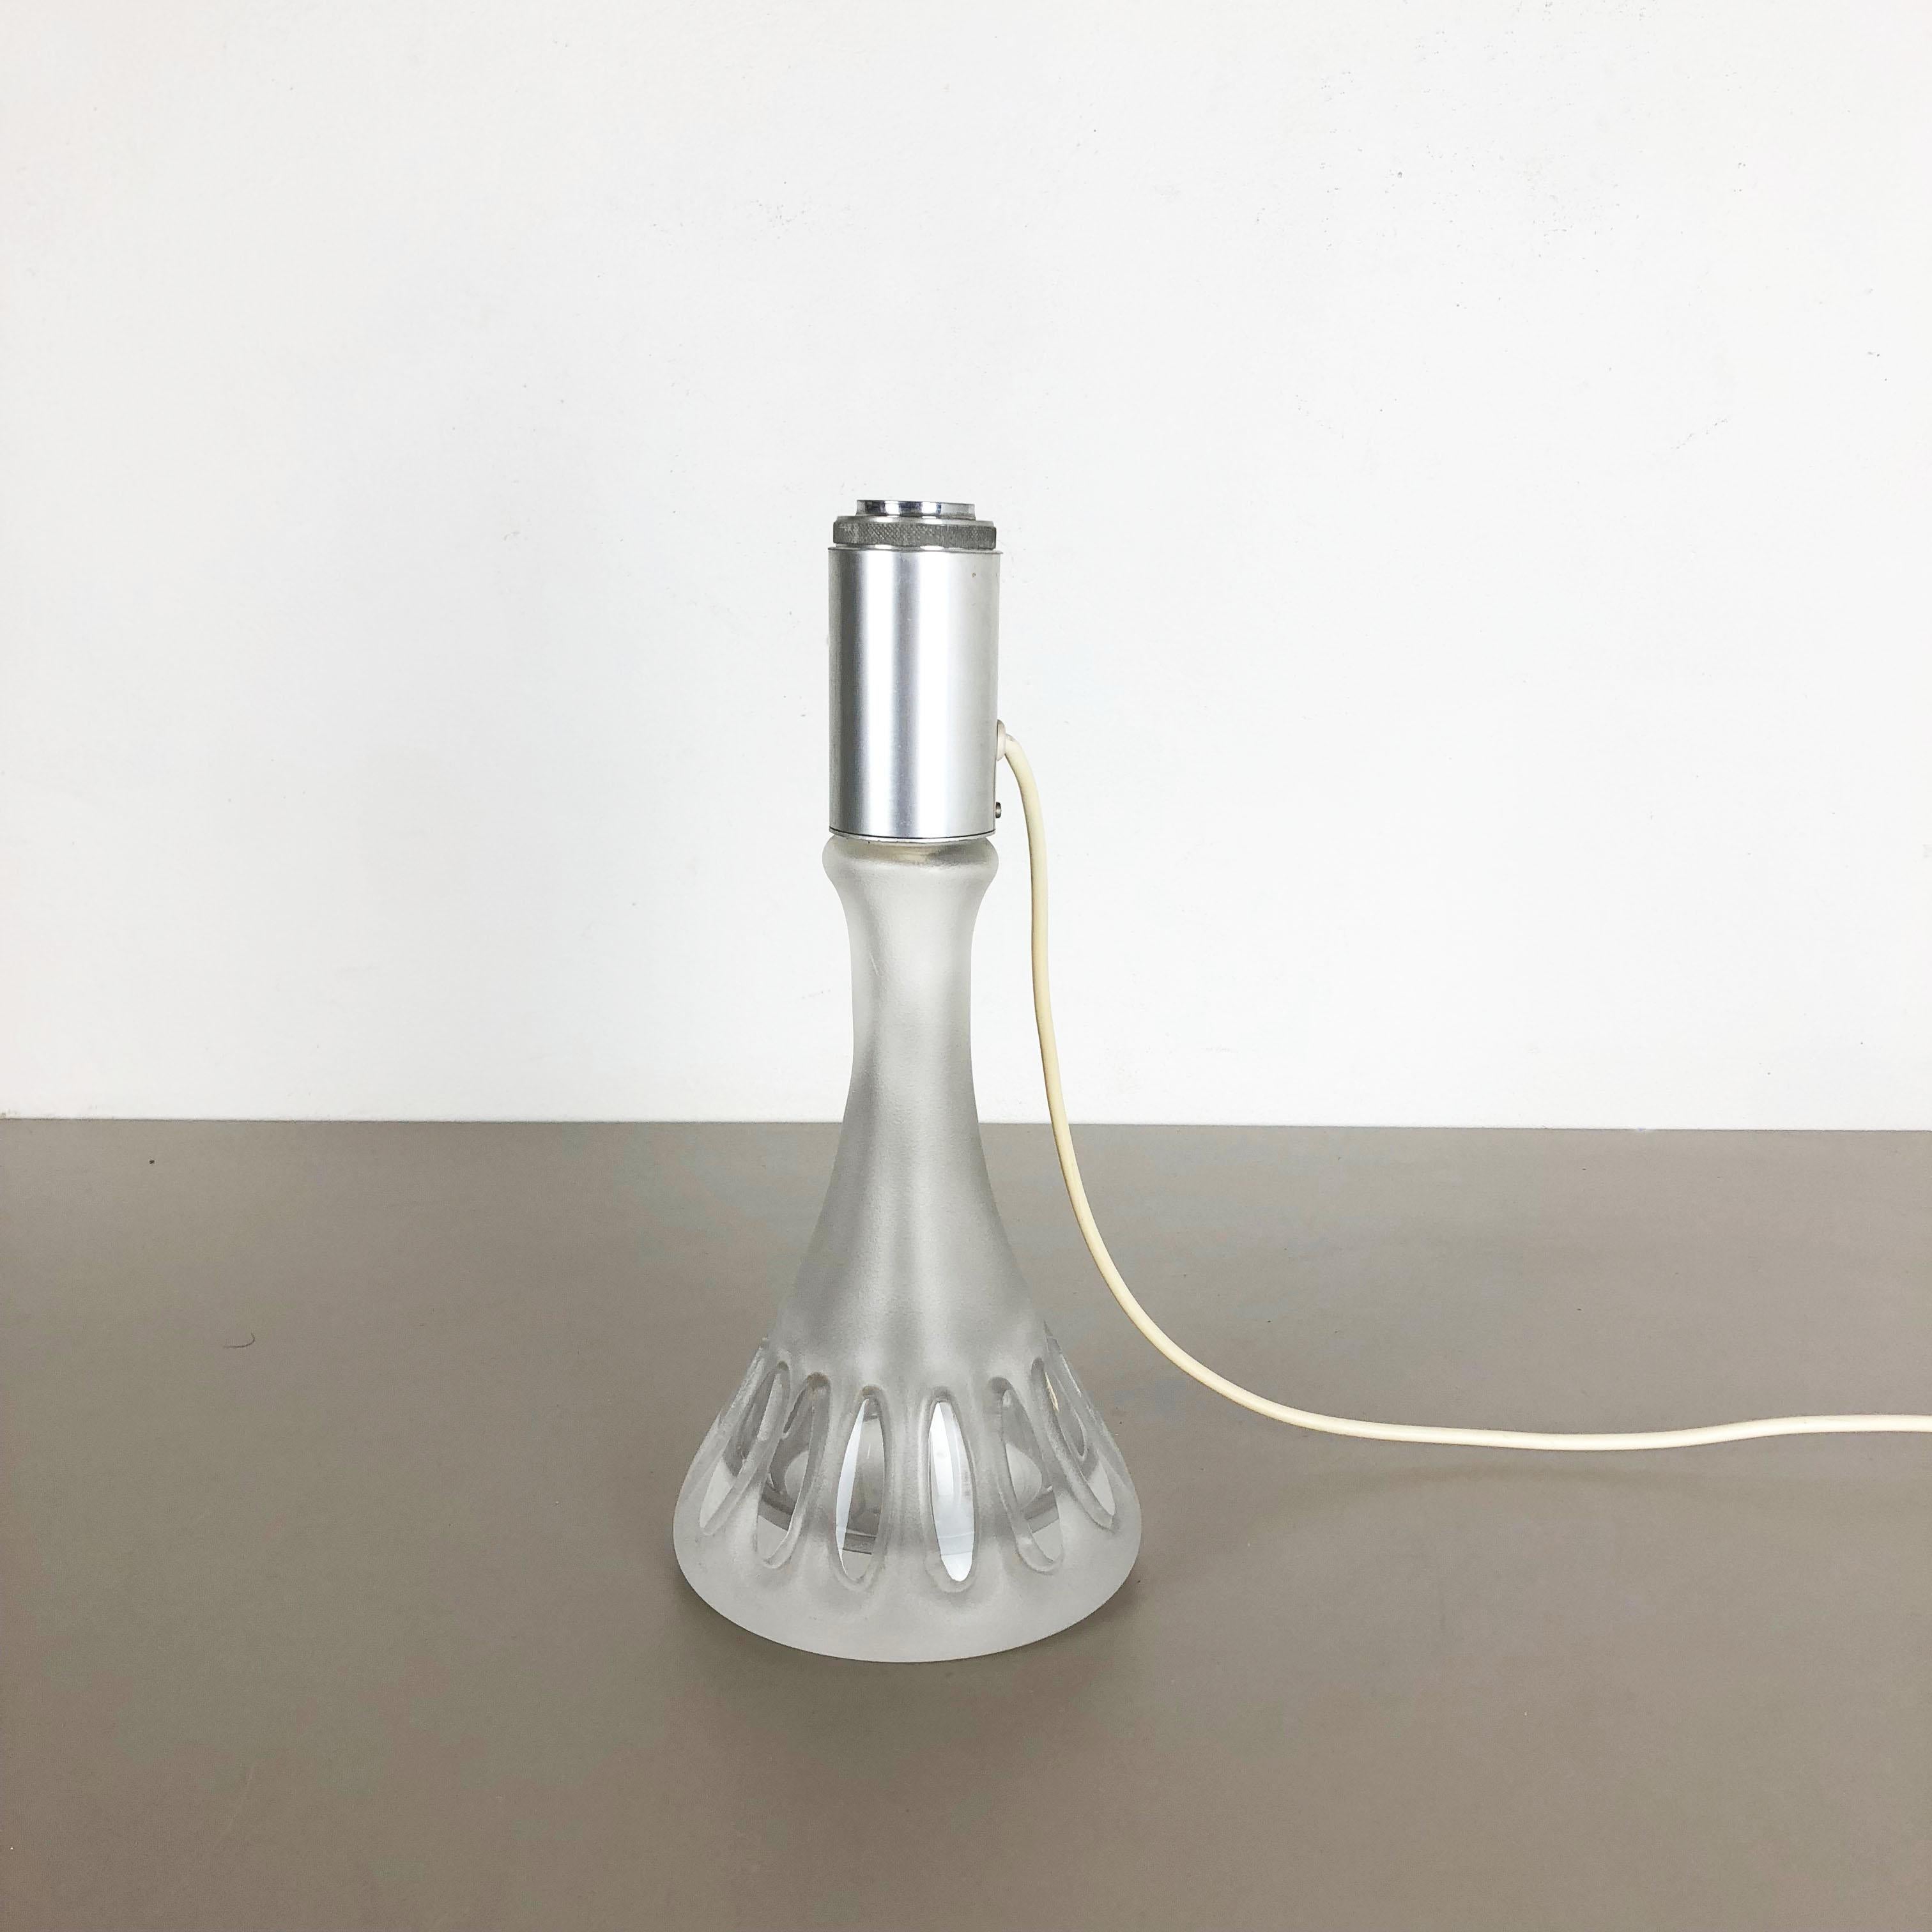 Original 1970s Metal and Glass Tulip Desk Light by Peill & Putzler, Germany In Good Condition For Sale In Kirchlengern, DE